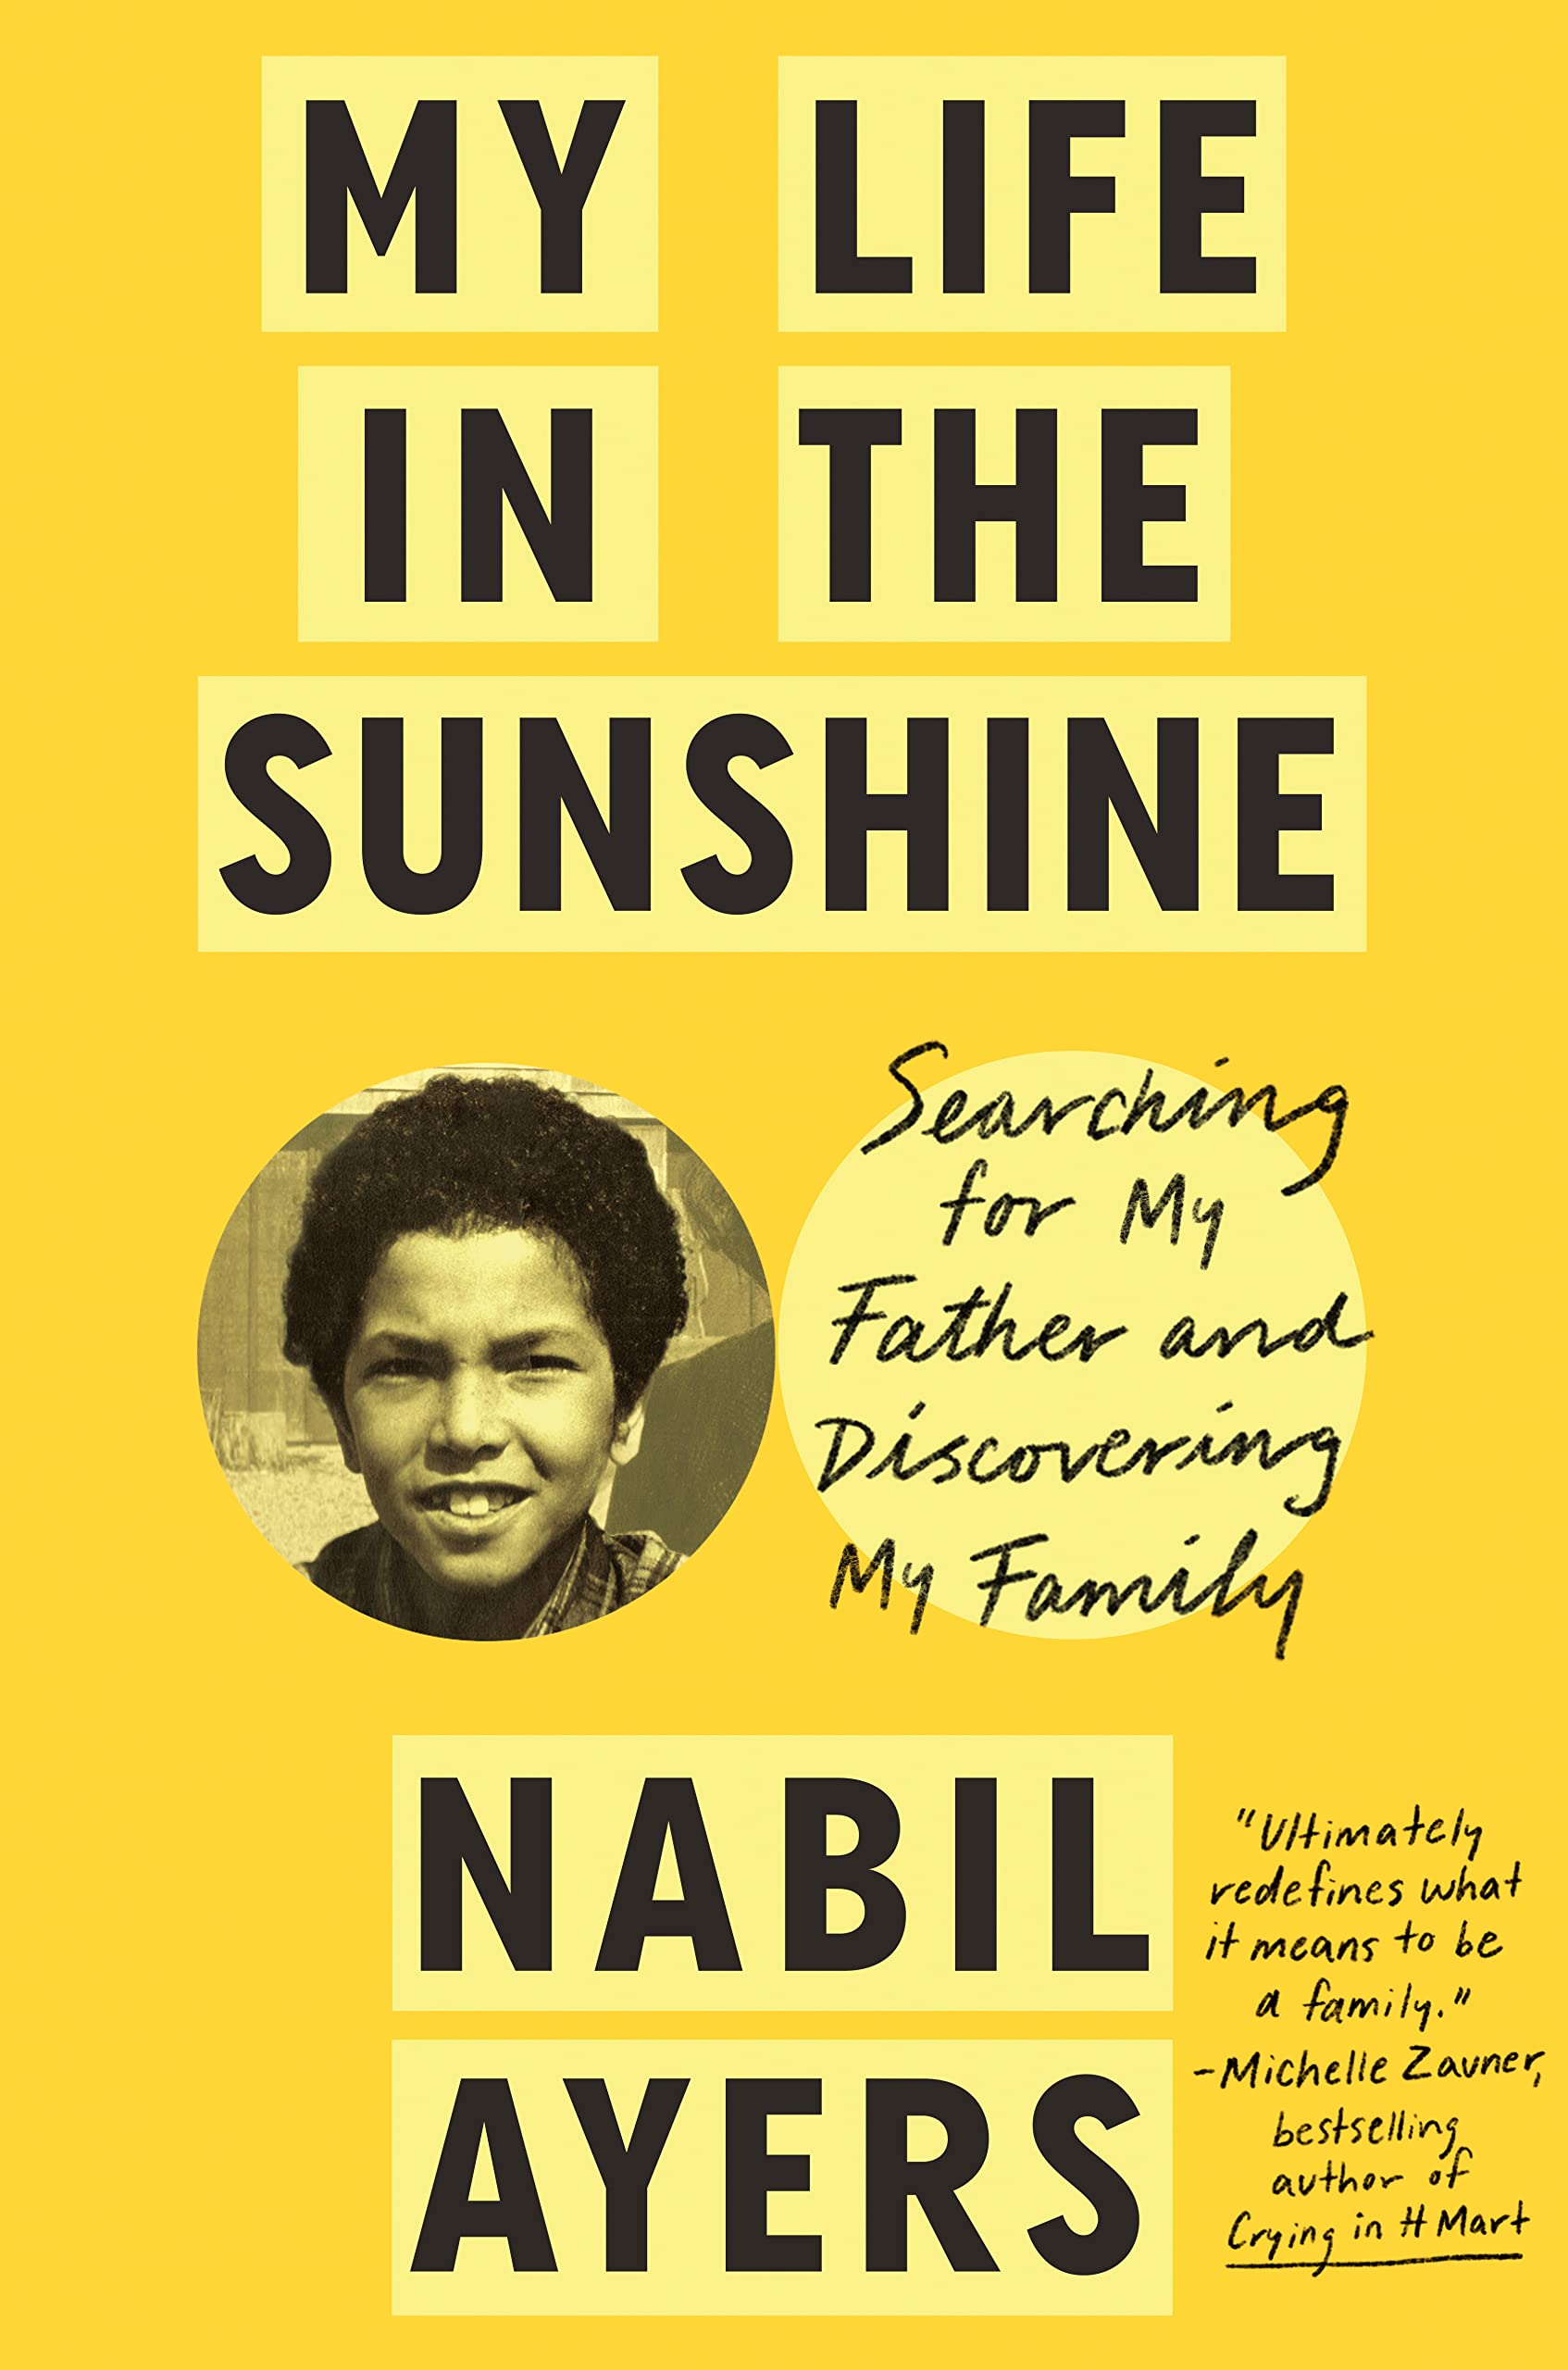 Nabil Ayers - My Life In The Sunshine: Searching For My Father and Discovering My Family - Hardback Book